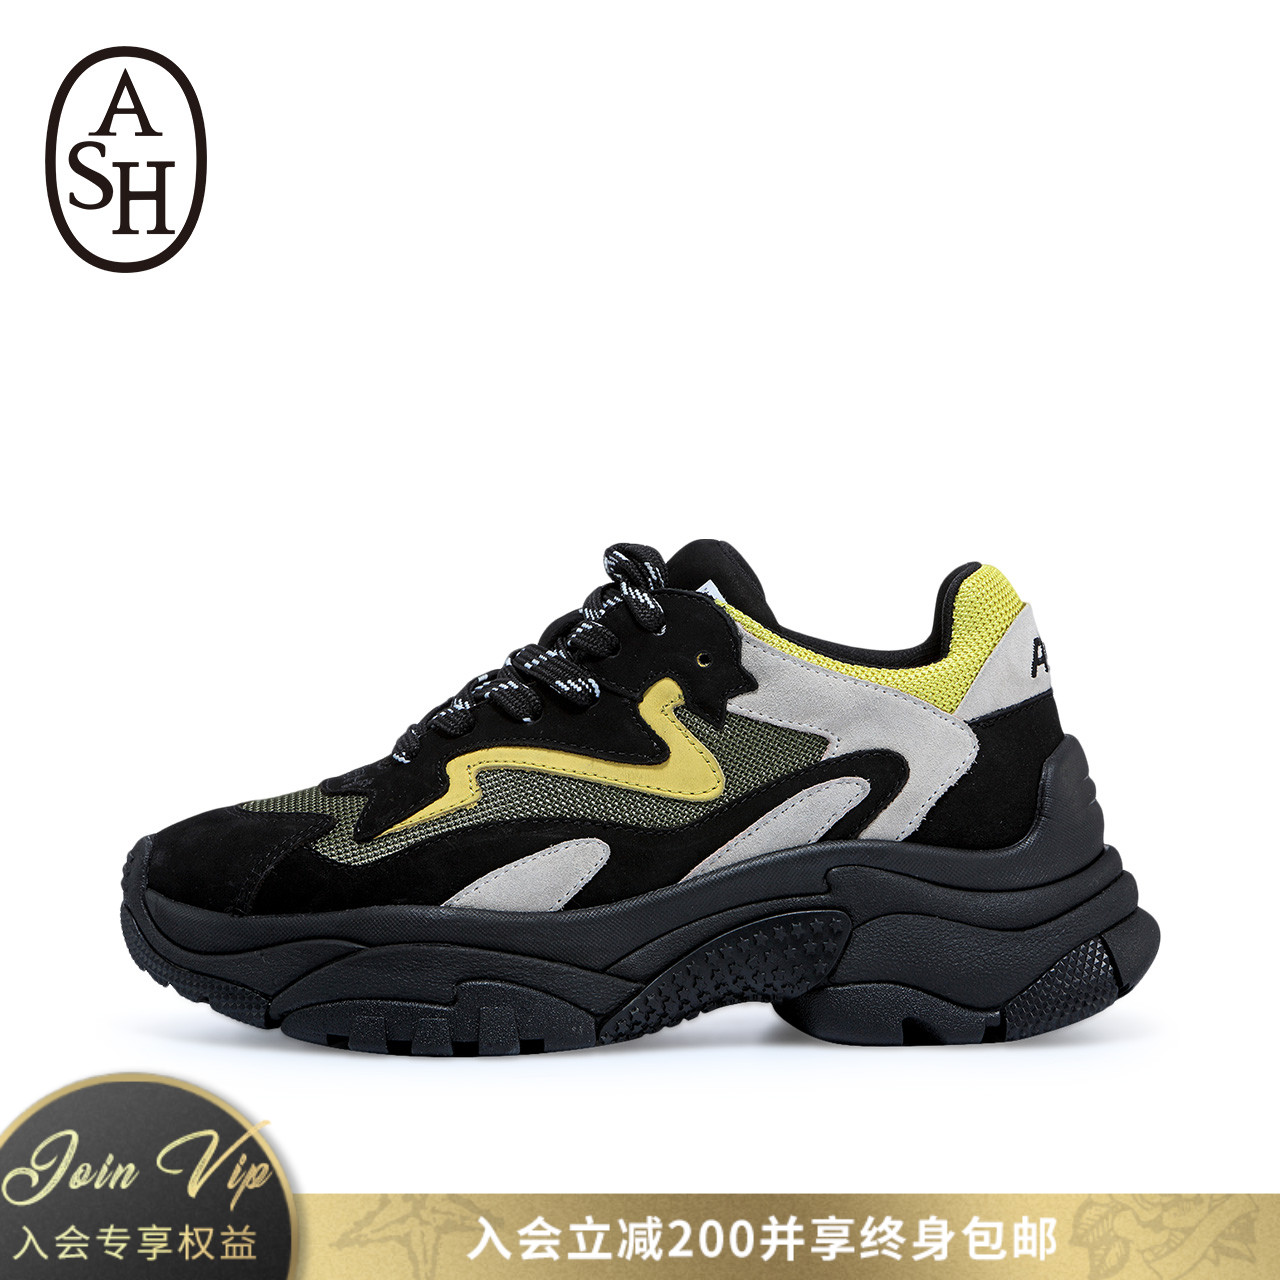 ASH Women's Shoes New ADDICT Series Colour-impact Fashion Daddy Shoes Heightening Sports Shoes